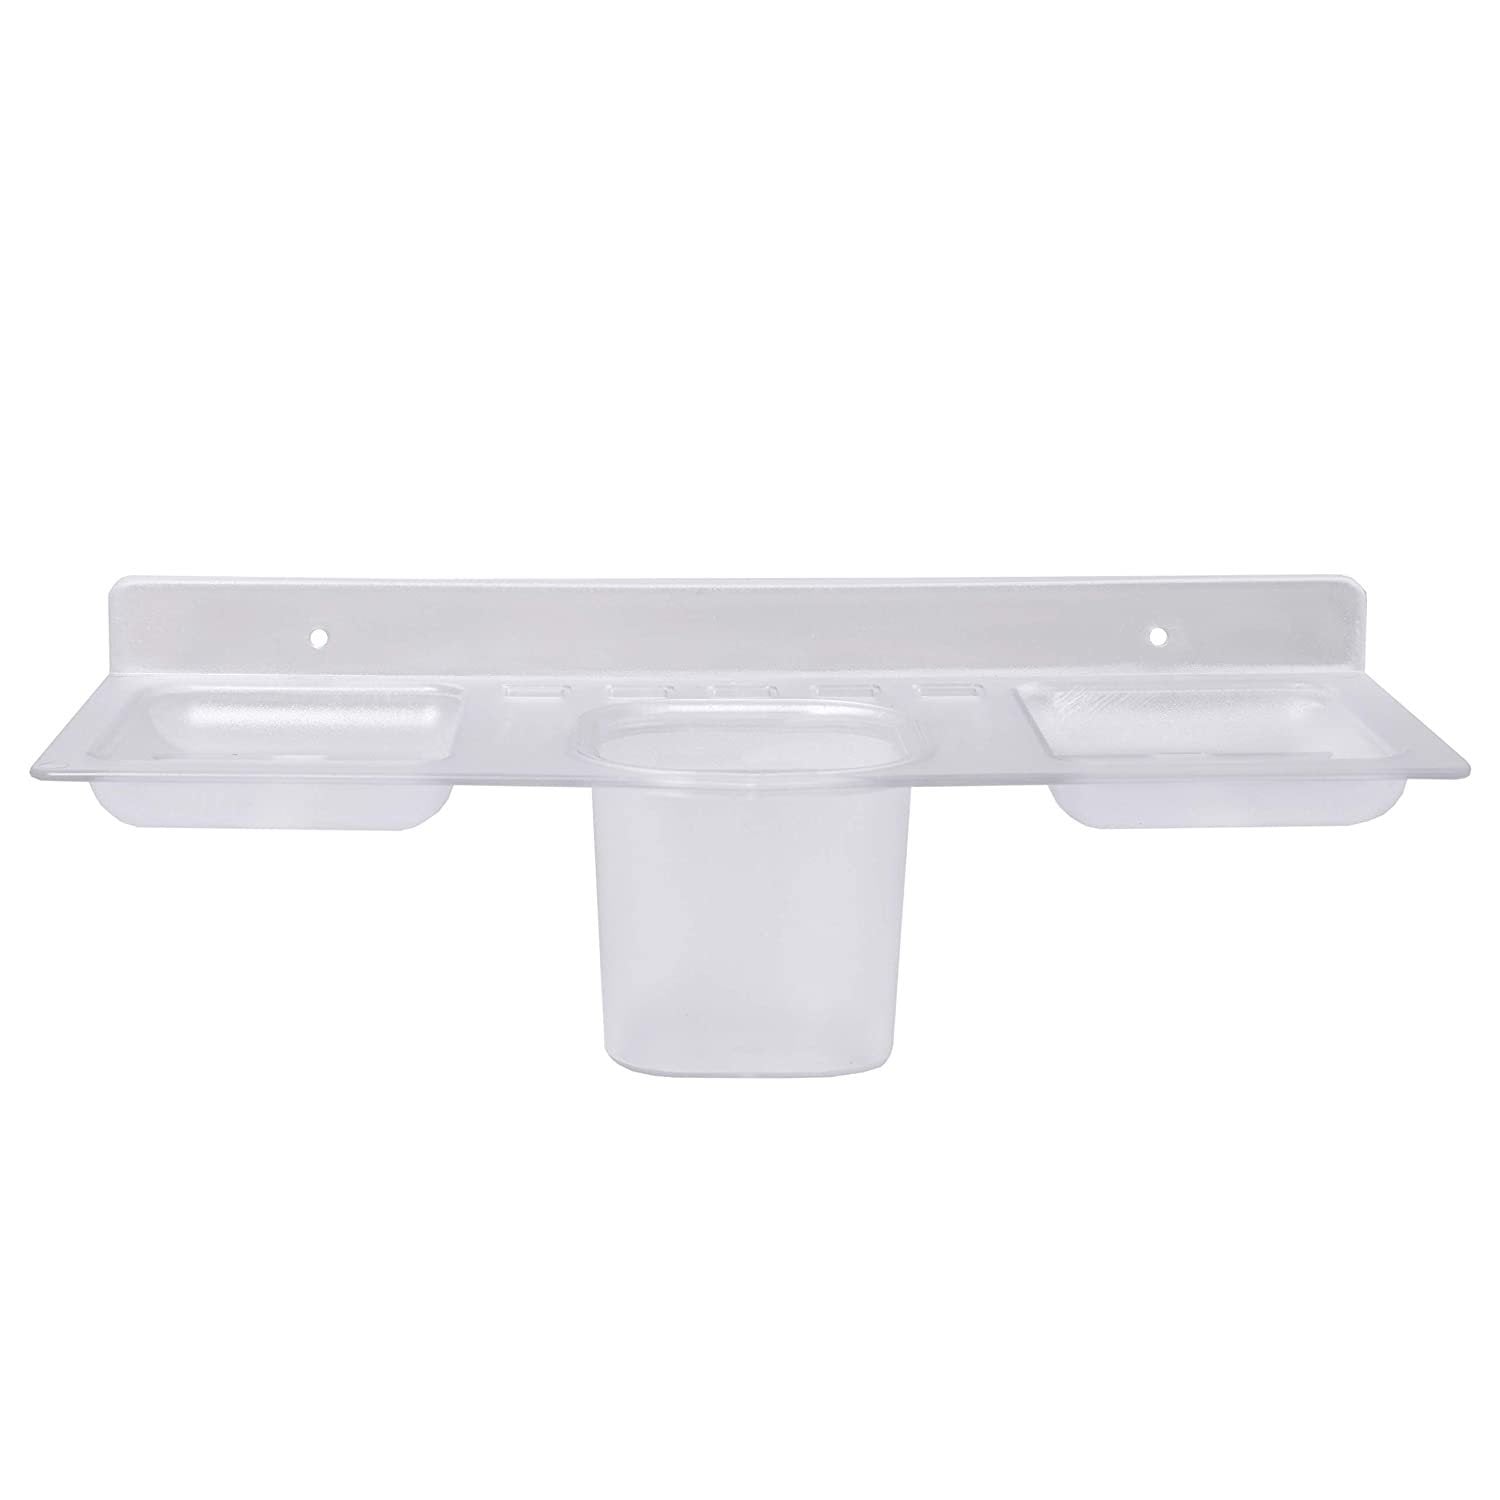 756_abs plastic 4 in 1 multipurpose kitchen bathroom shelf paste brush stand soap stand tumbler holder bathroom accessories by plantex